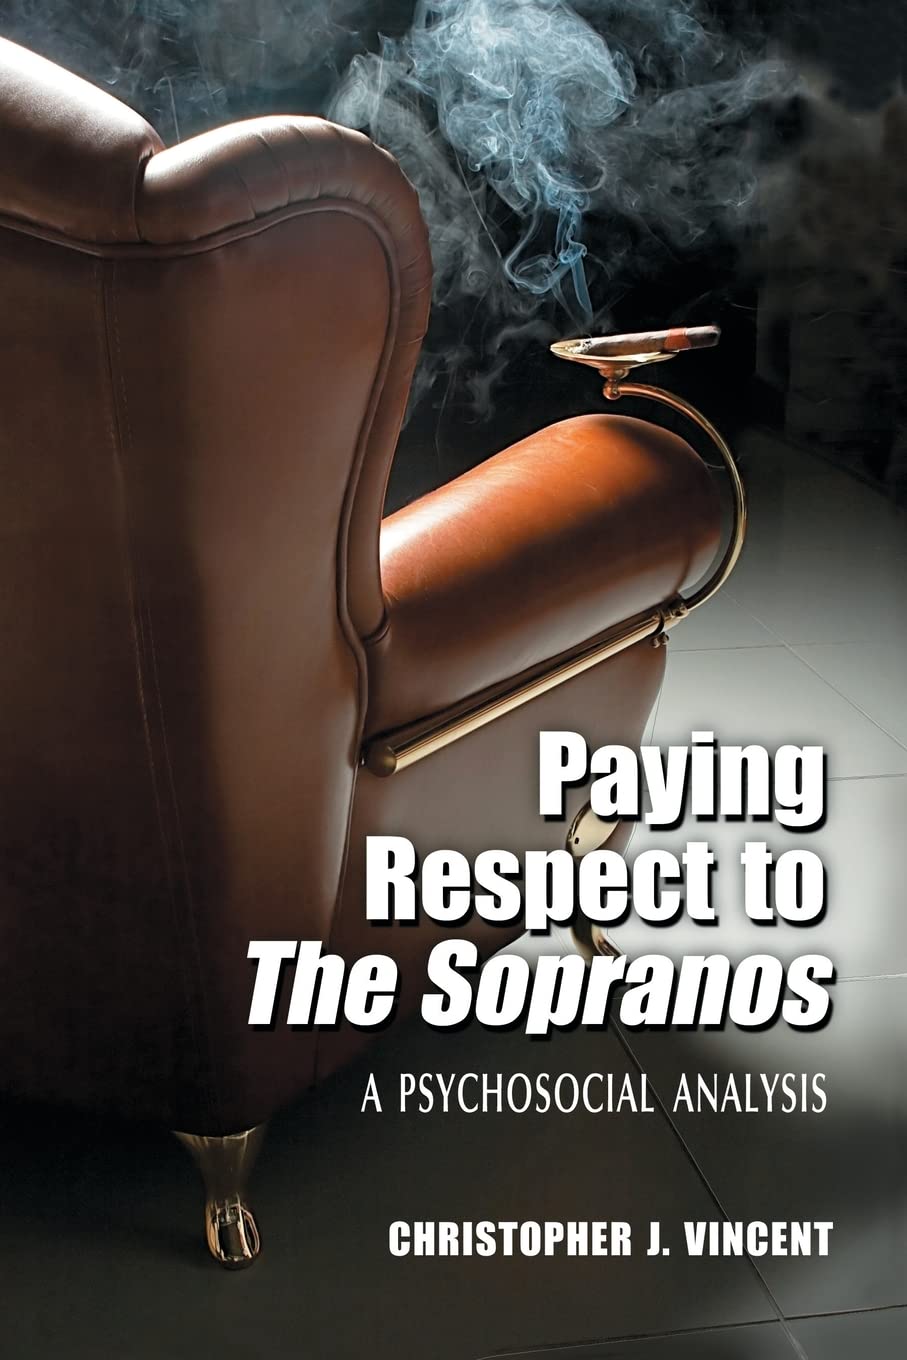 Paying Respect to the Sopranos: A Psychosocial Analysis